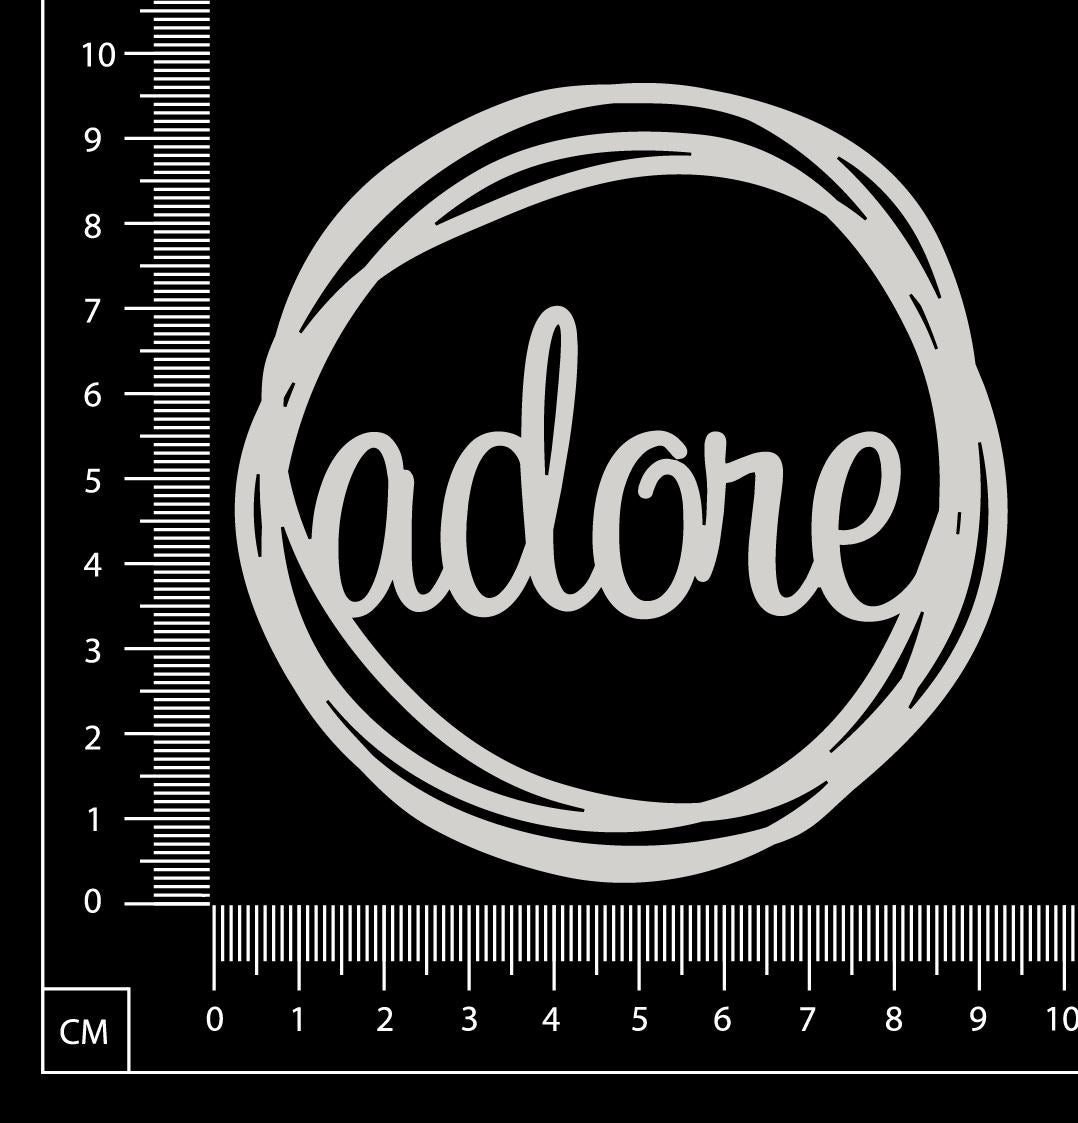 Distressed Word Circle - Adore - White Chipboard